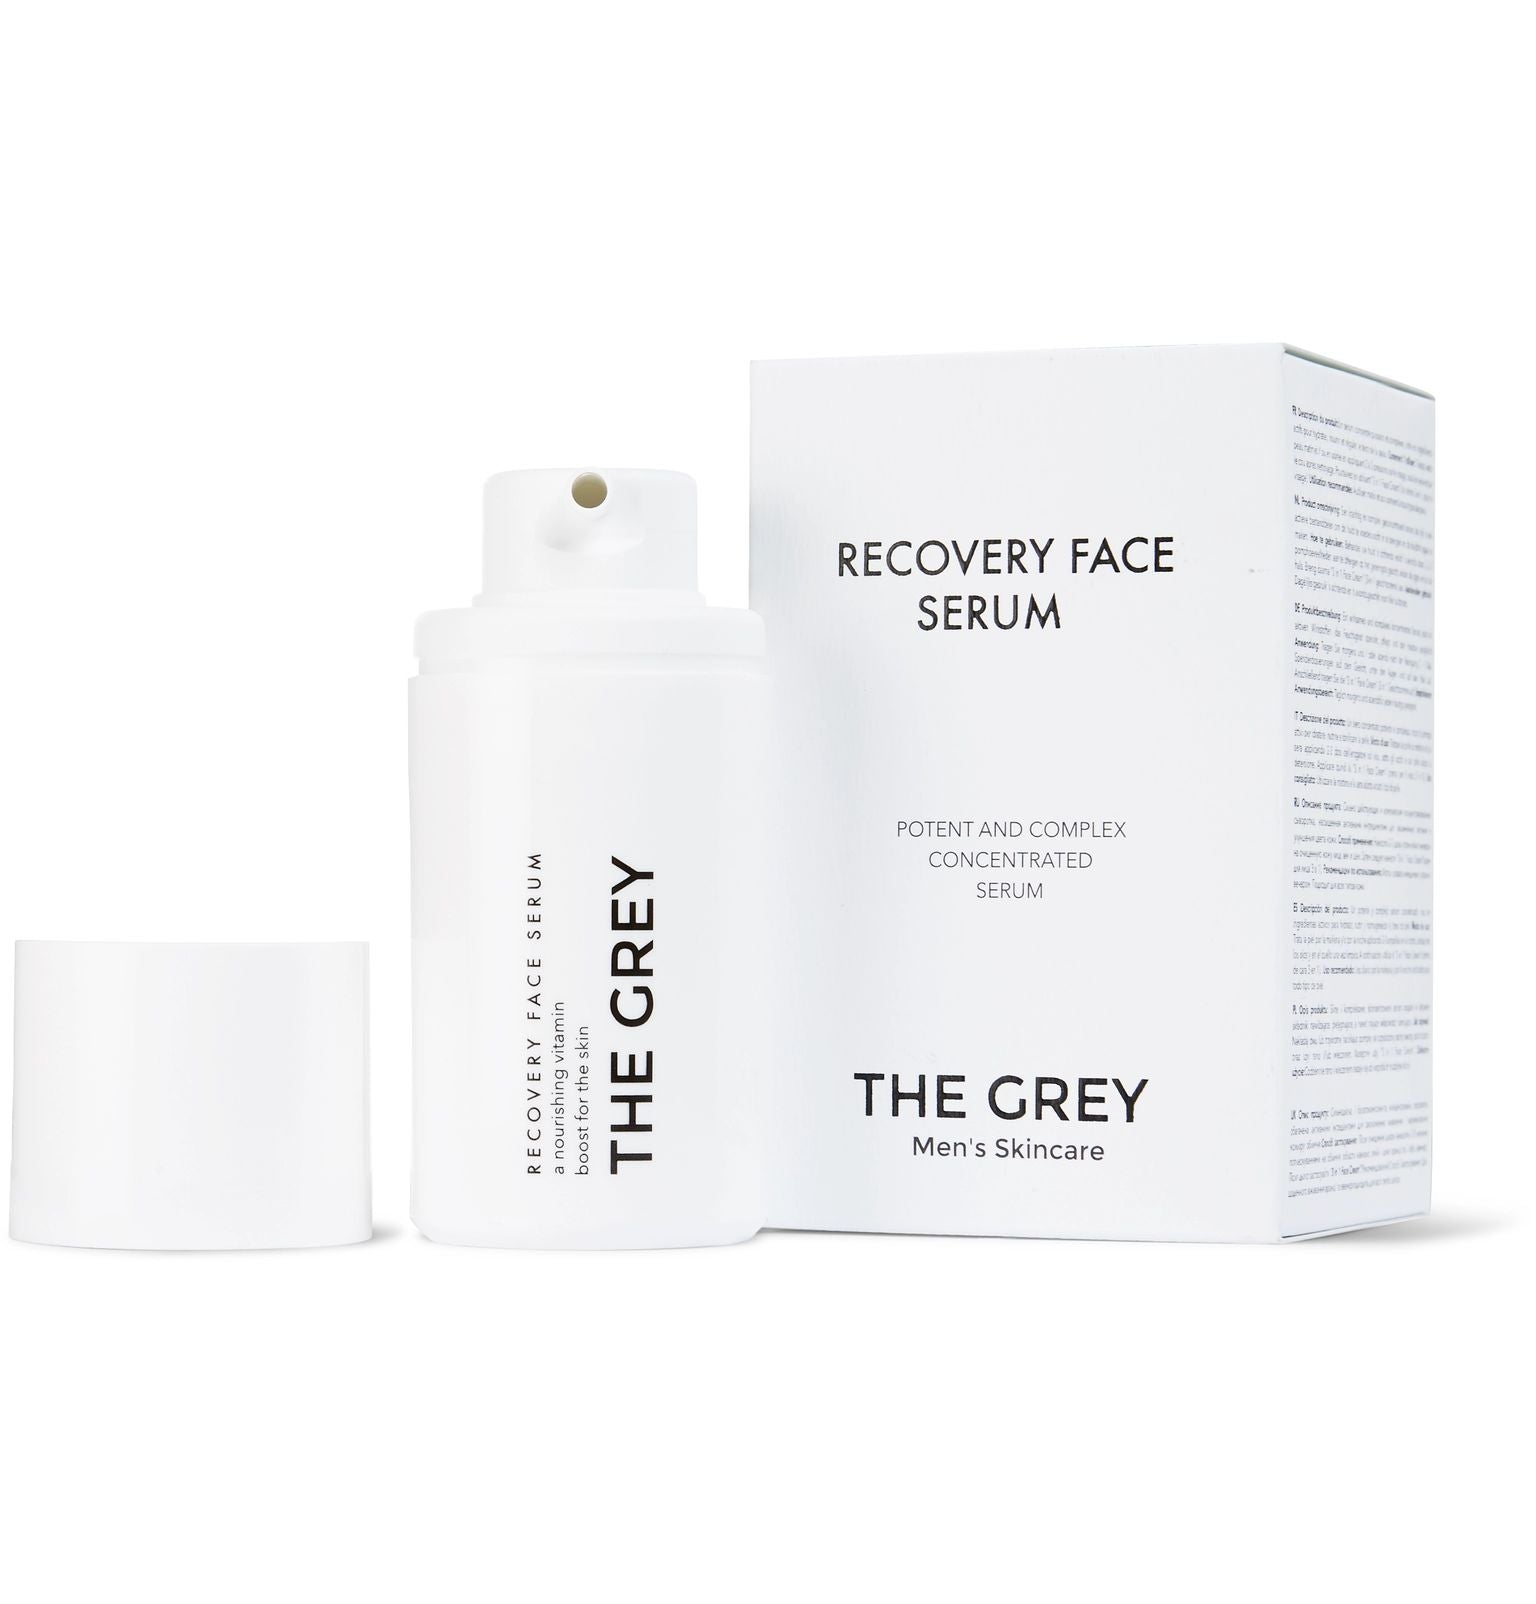 The Grey Men's Skincare: Recovery Face Serum